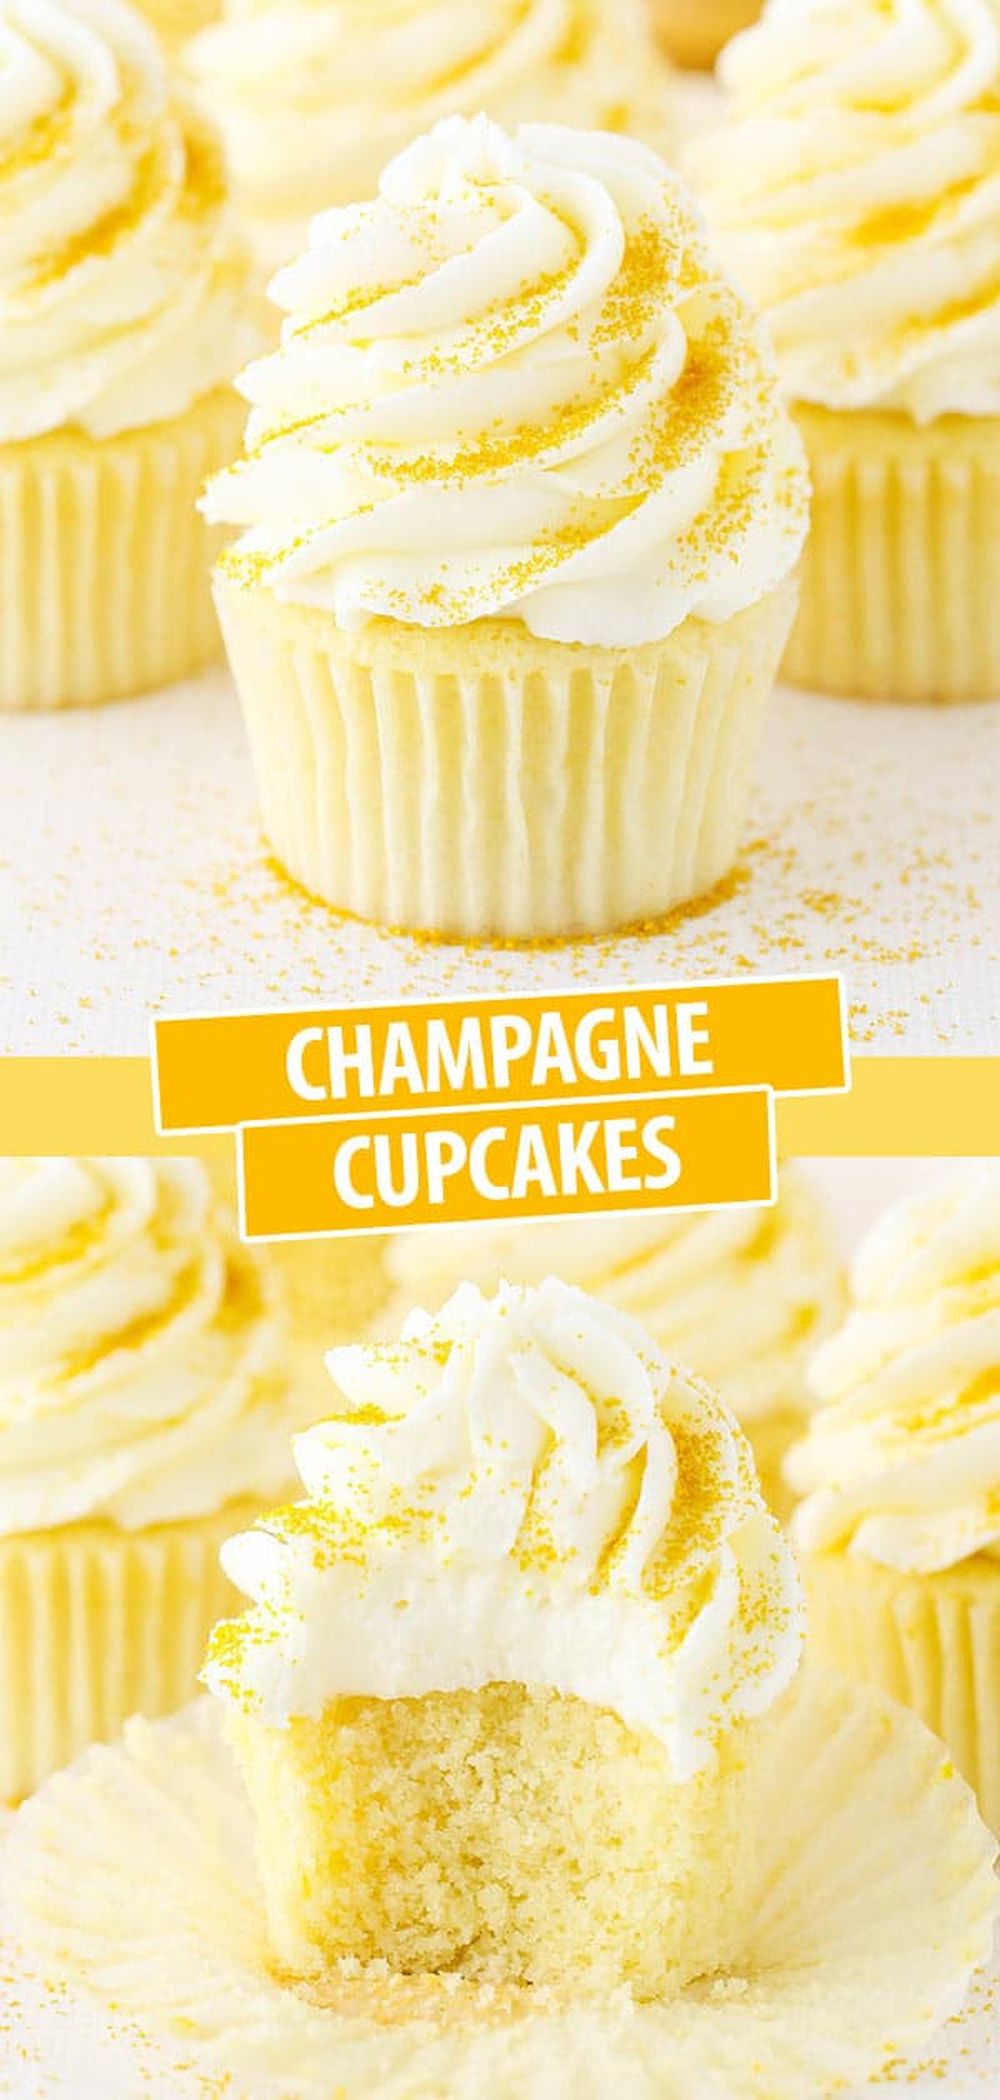 Champagne cupcakes homemade edible valentine's day gifts